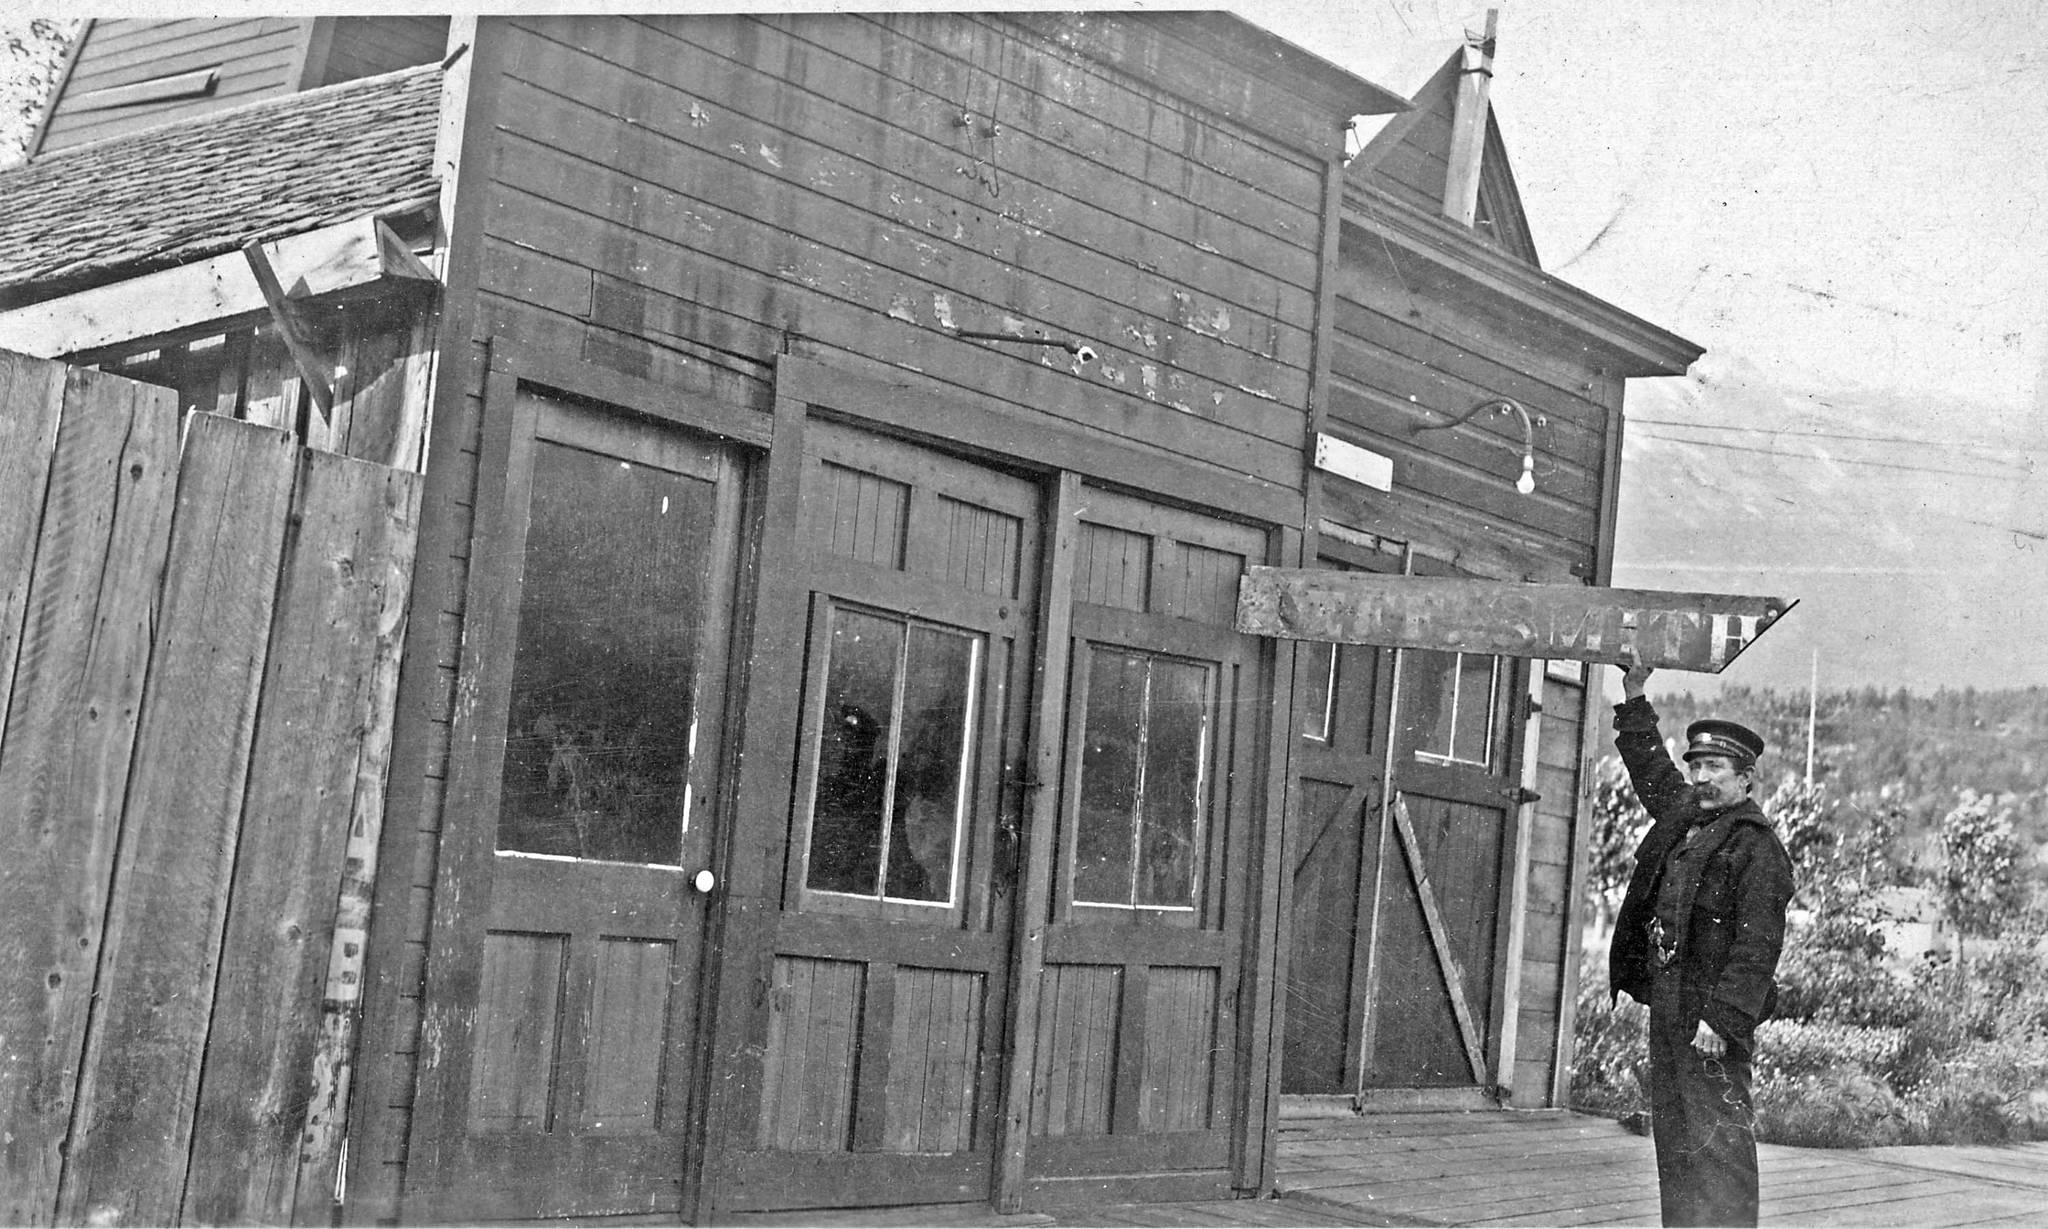 Martian Itjen stands in front of his newly acquired building and holding up Jeff Smith’s original façade sign. The date of this image is uncertain but the photograph was probably taken at the time of Itjen’s purchase of the building around 1935. (Courtesy Photo | National Park Service, Klondike Gold Rush National Historical Park, George & Edna Rapuzzi Collection, KLGO 55695, Gift of the Rasmuson Foundation)